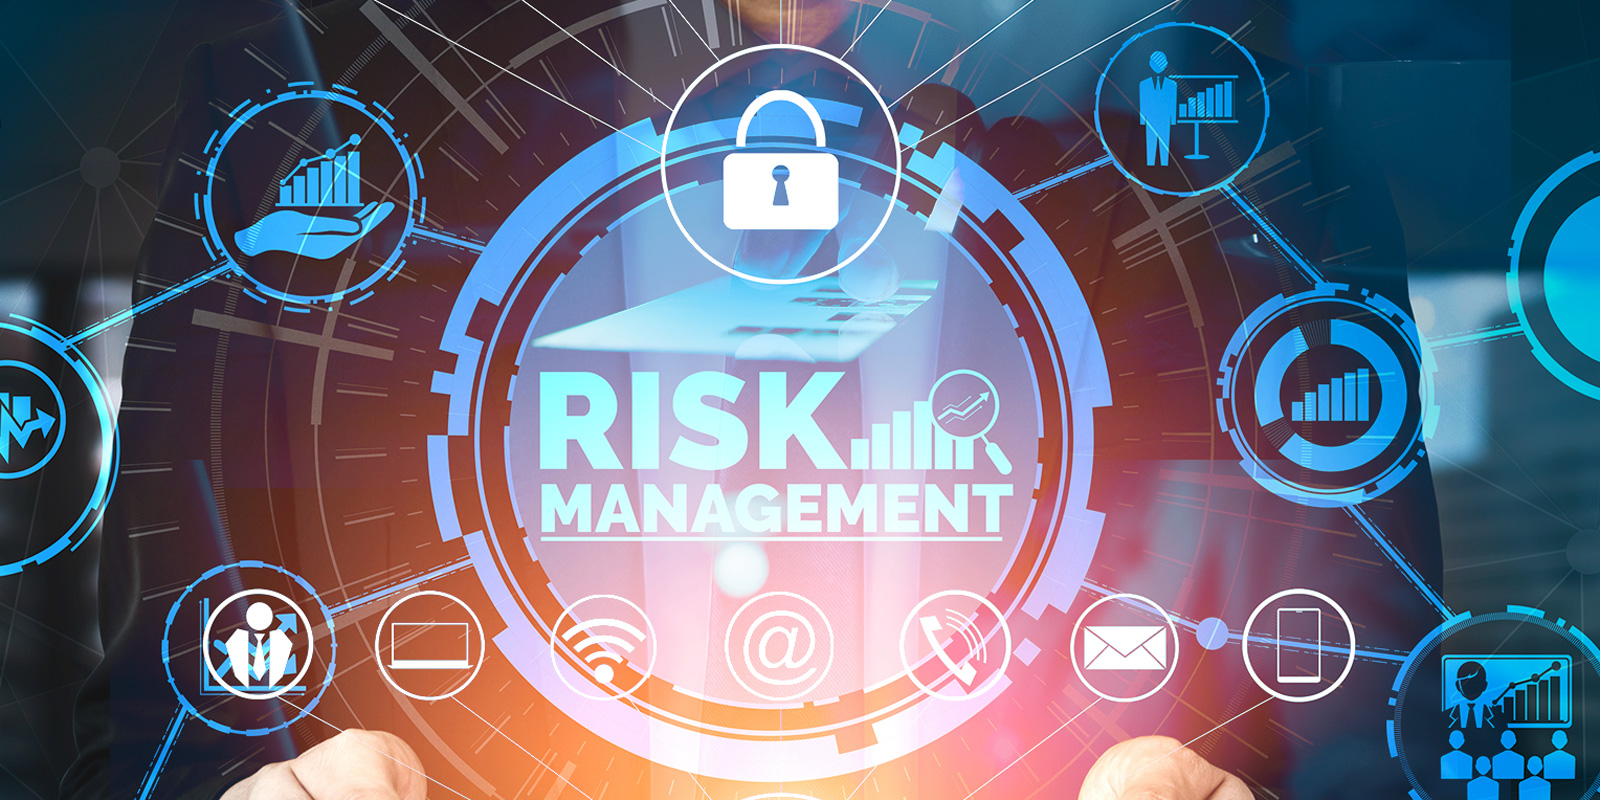 SECCybersecurity_Risk_Management_SOCIAL